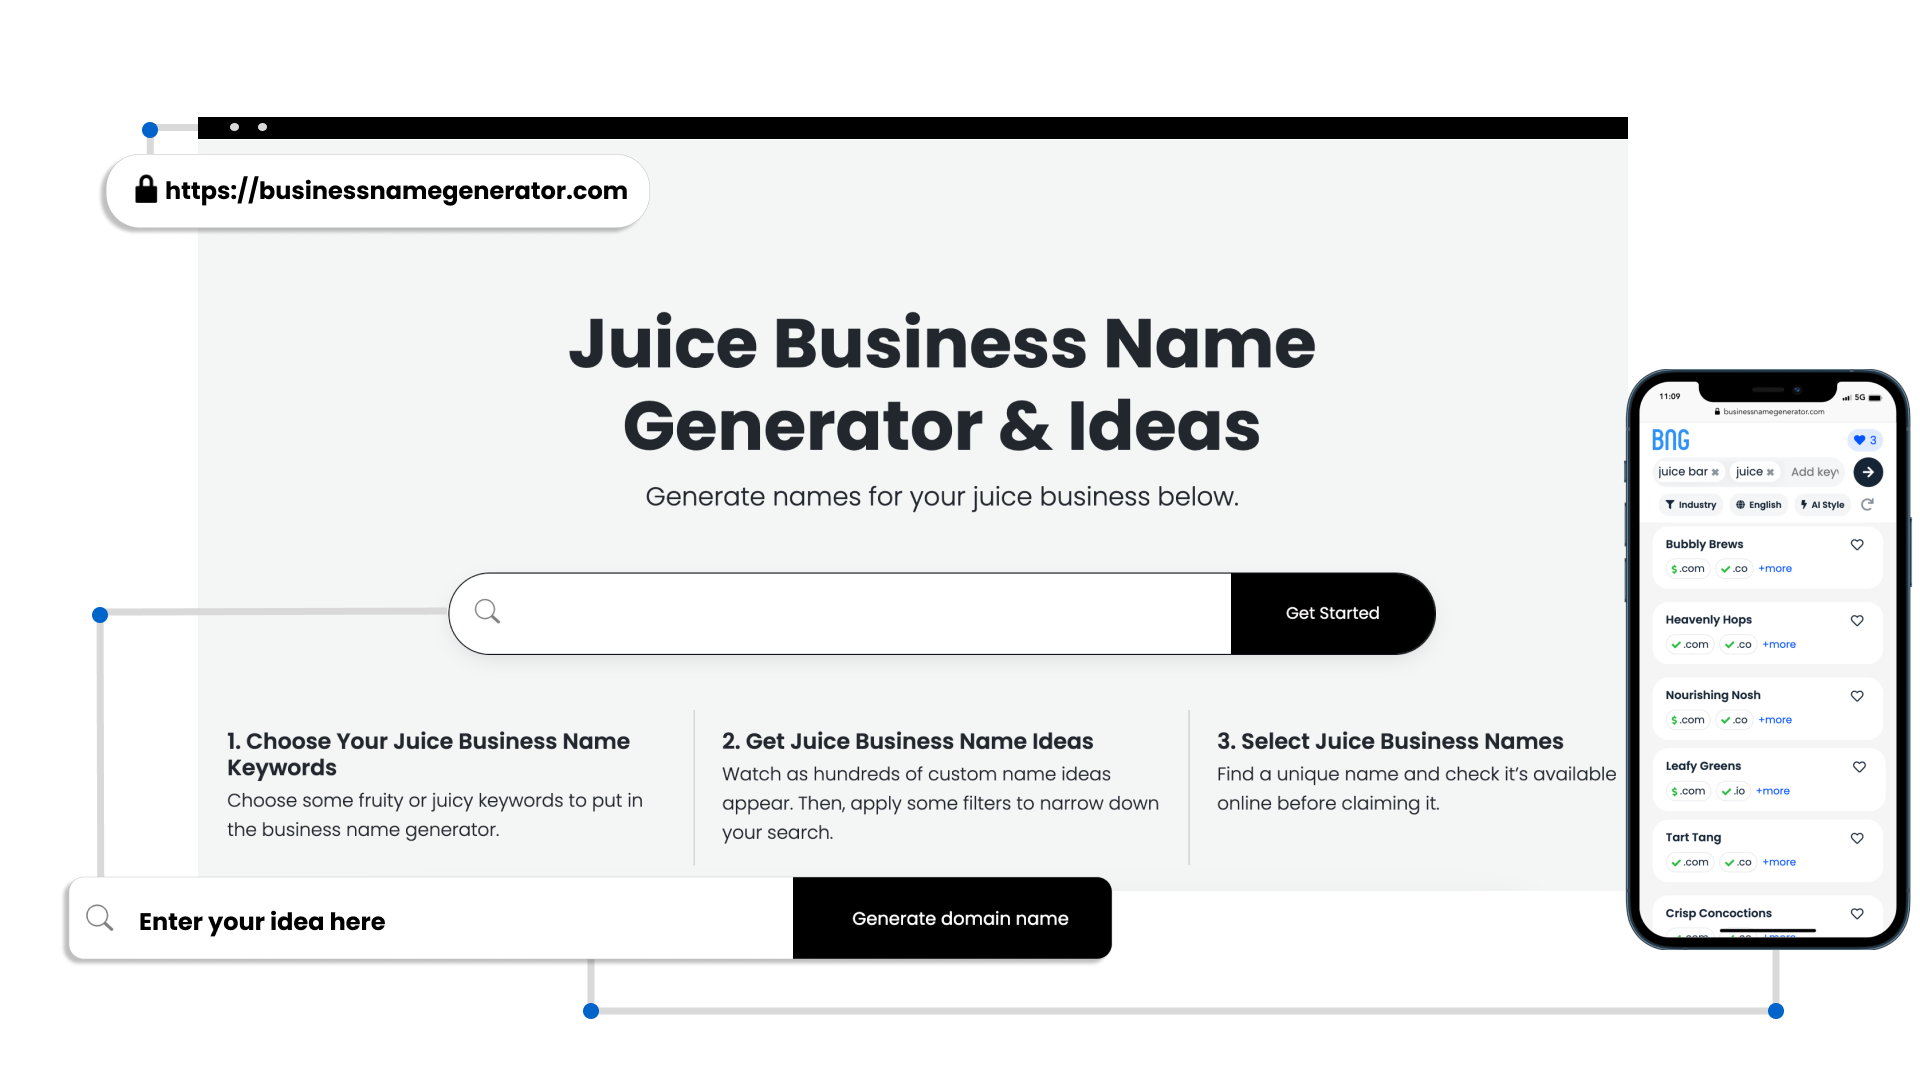 Benefits of Our Juice Business Name Generator
